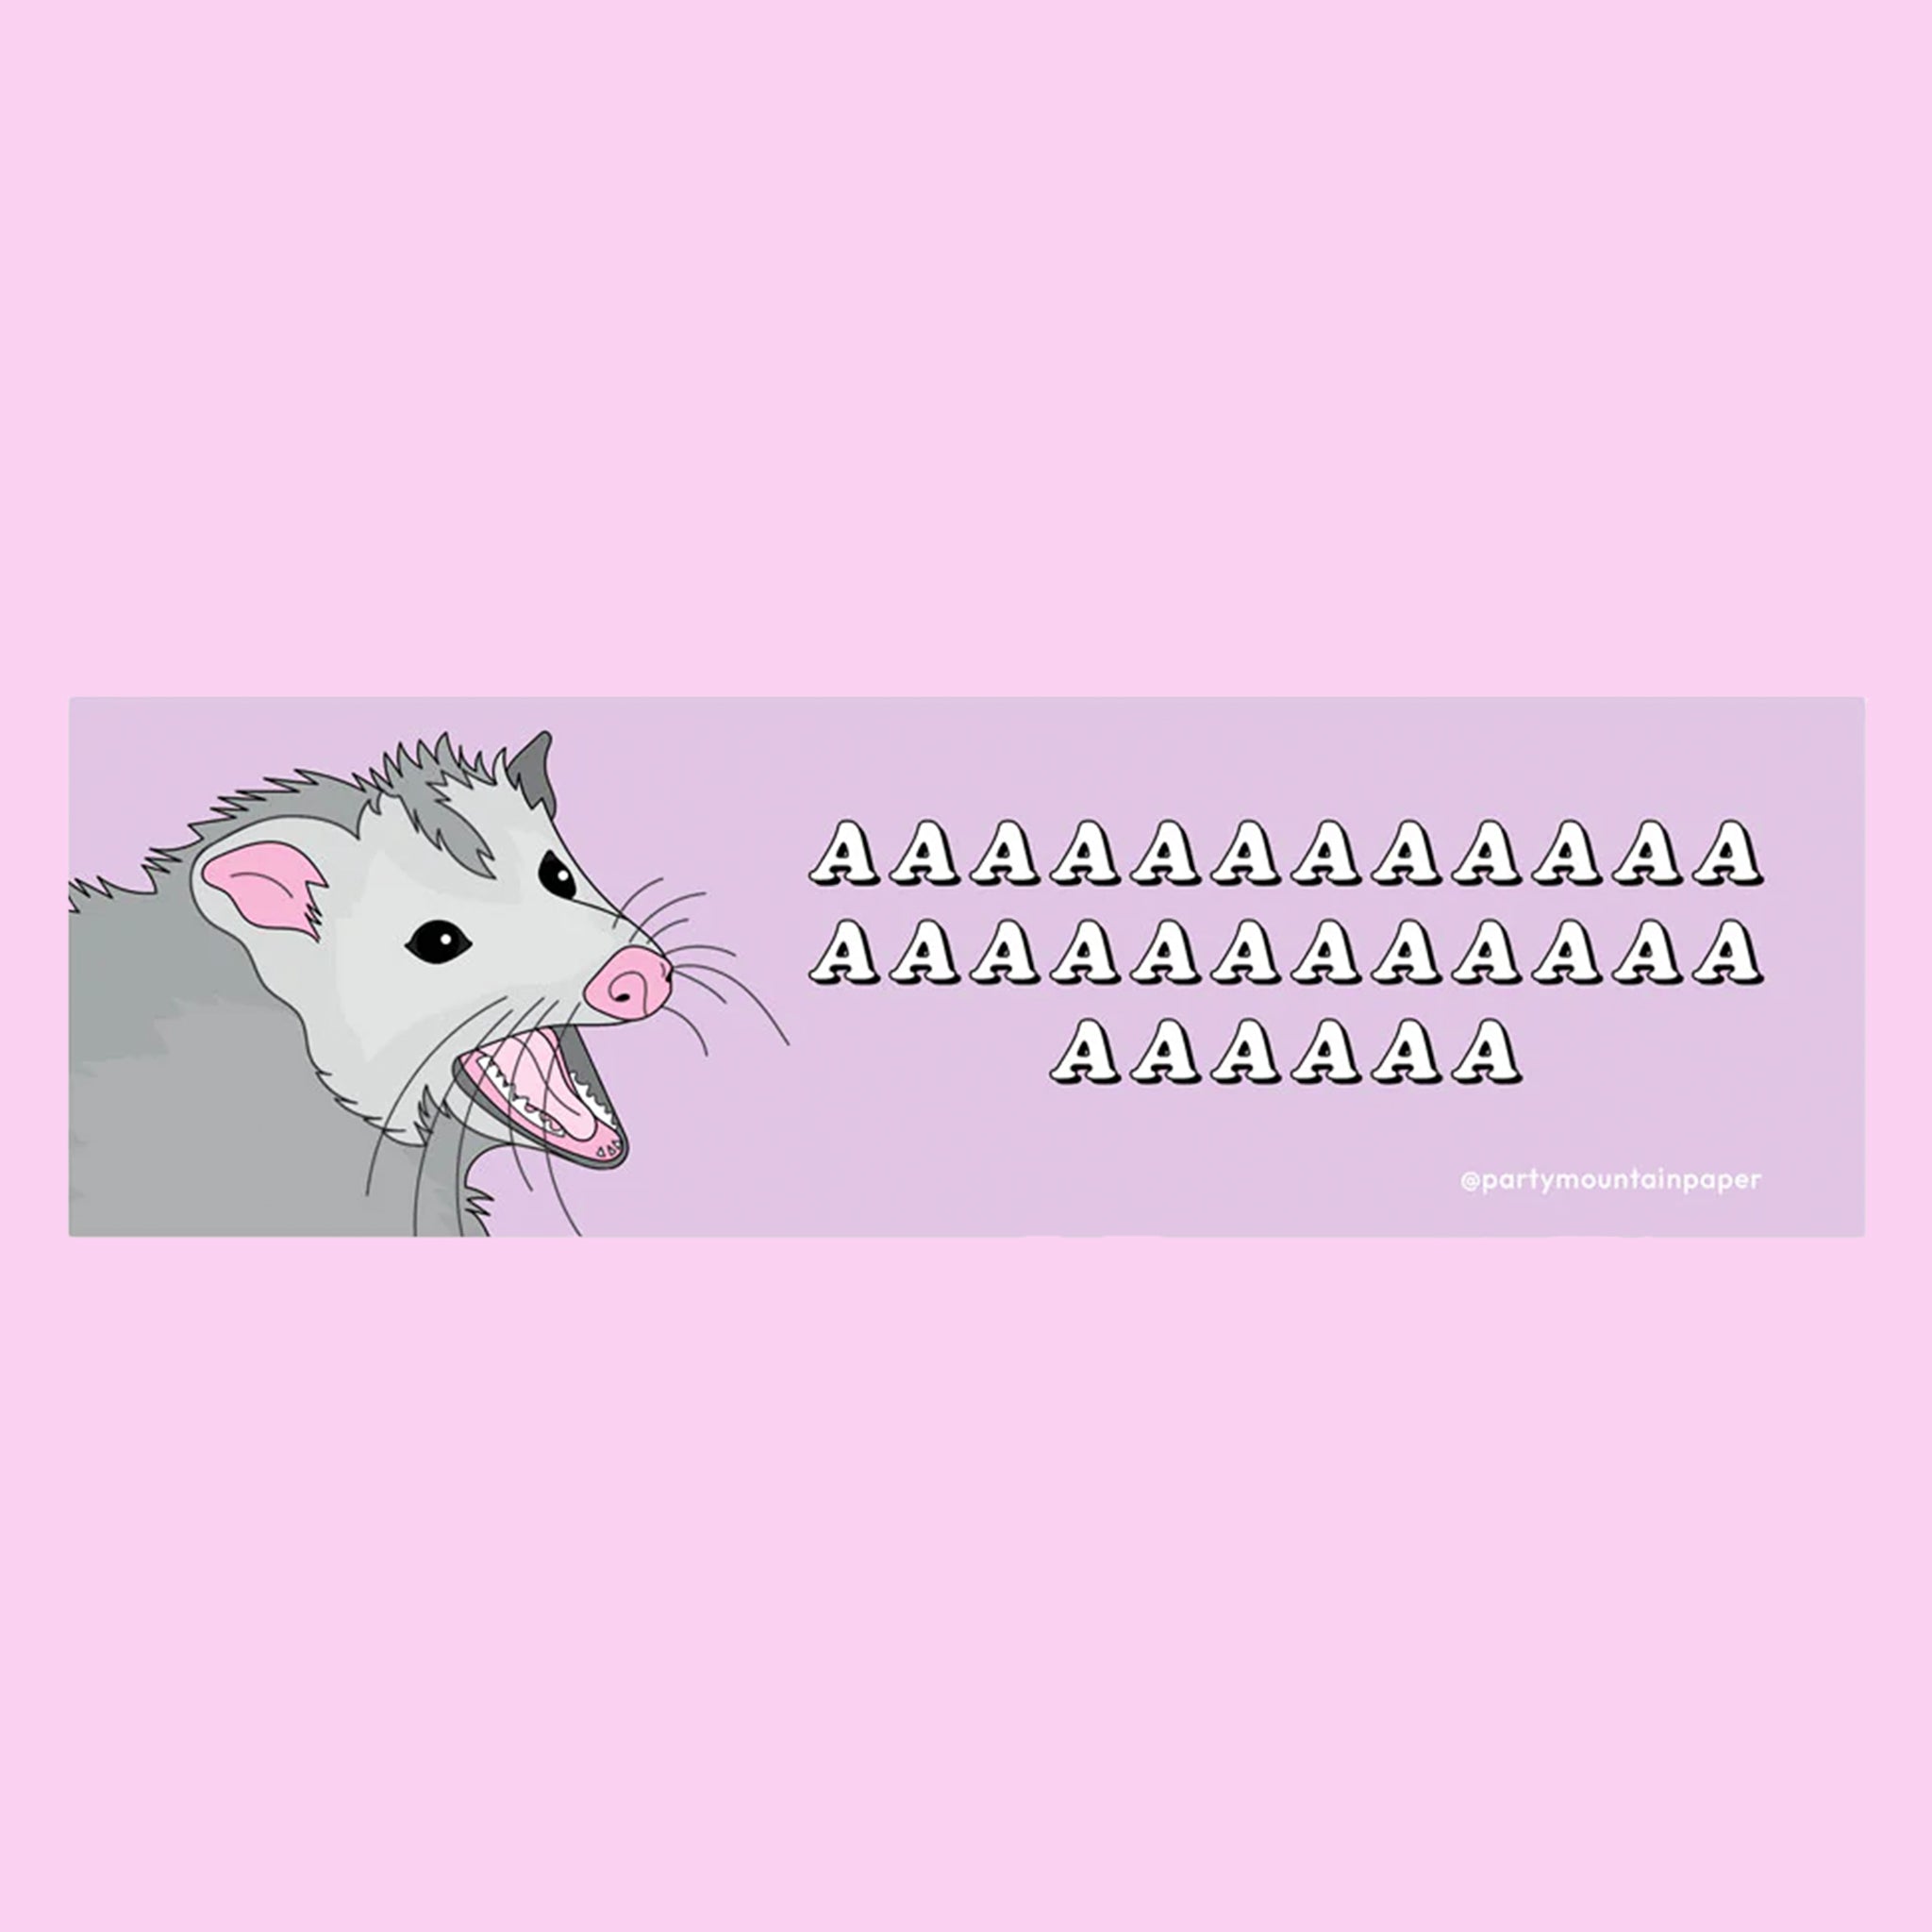 On a lilac background is a purple bumper sticker with an illustration of a possum and text on the right side that reads, "AAAAAAA". 